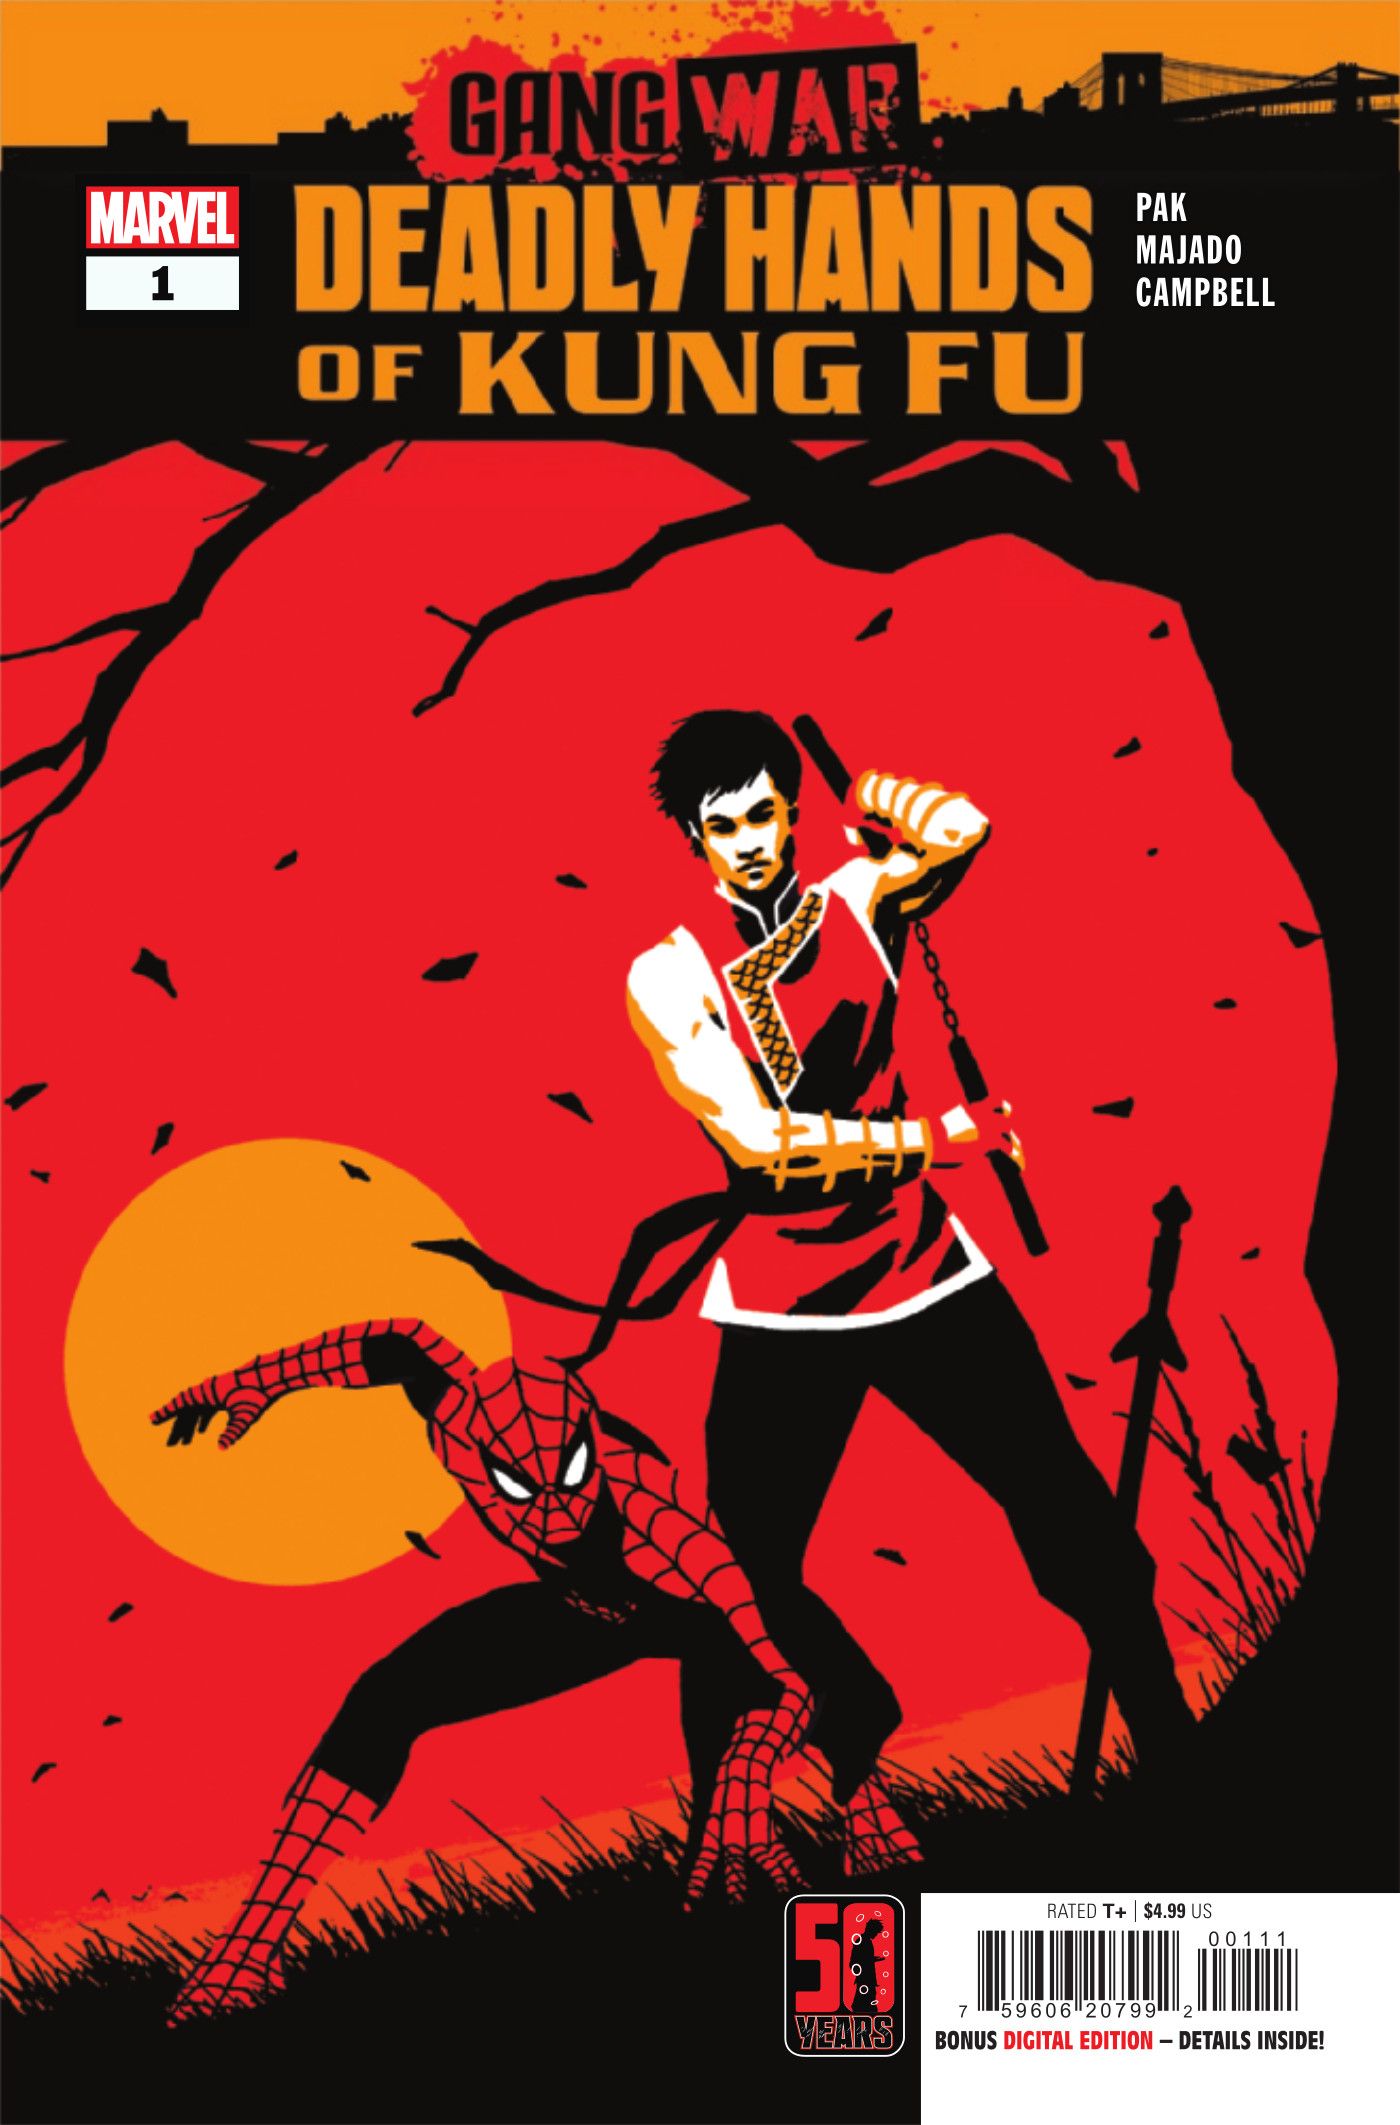 Deadly Hands of Kung-Fu: Gang War #1 ACover by David Aja